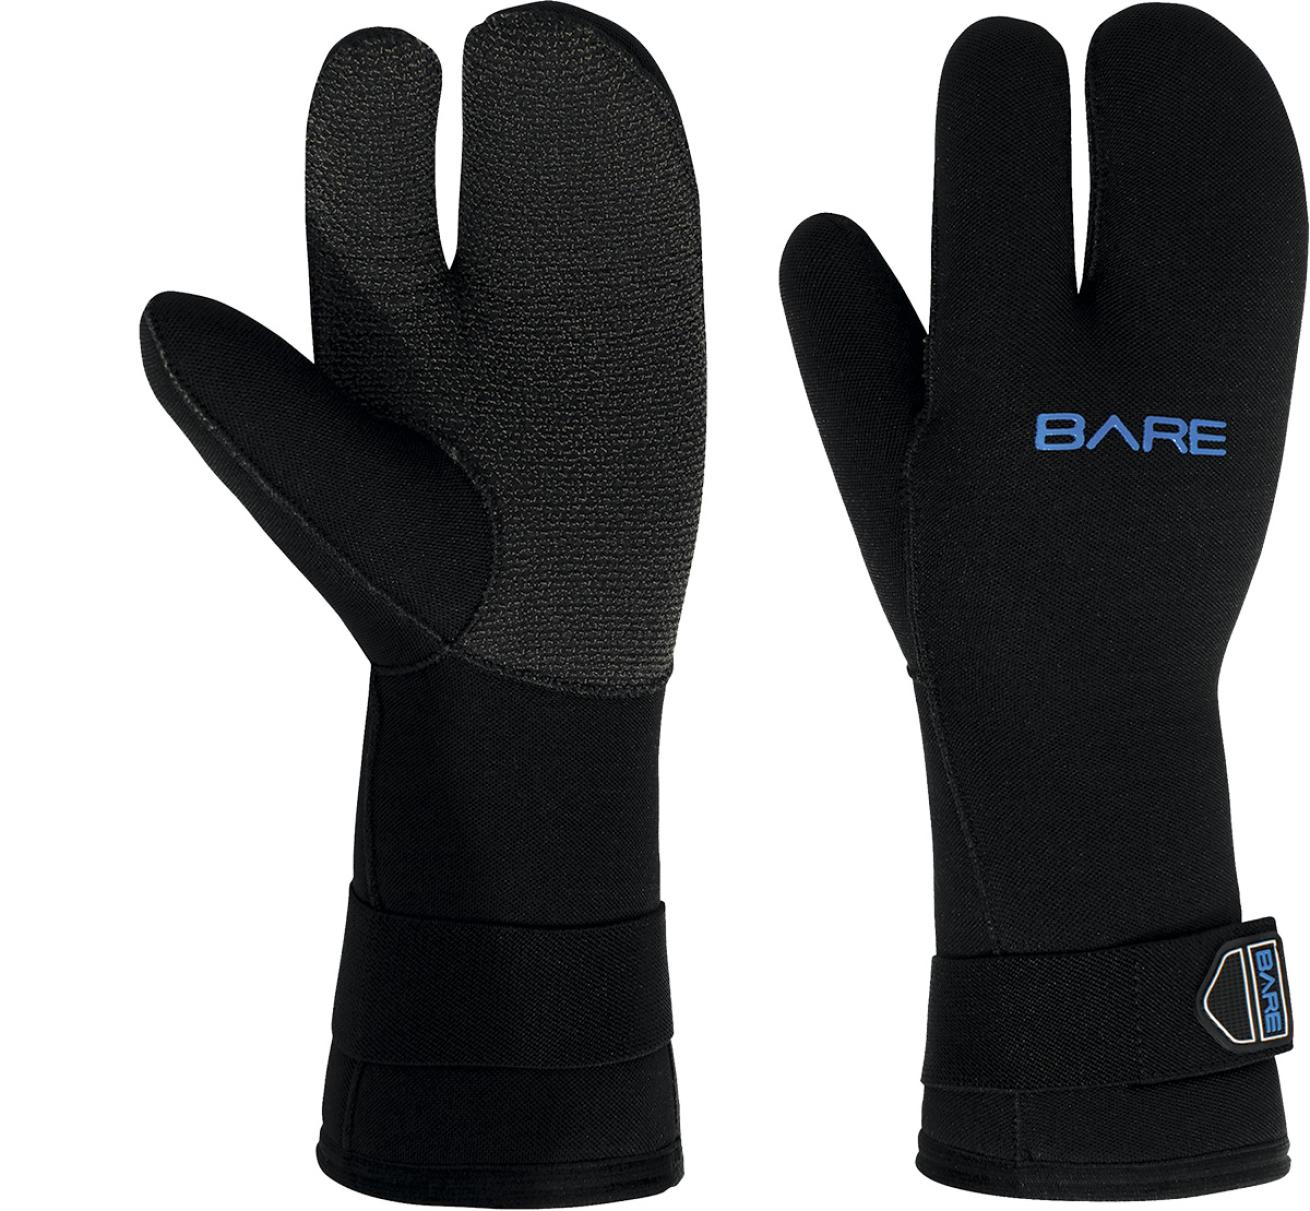 Scuba Diving Finger Mitts for Cold Water Diving